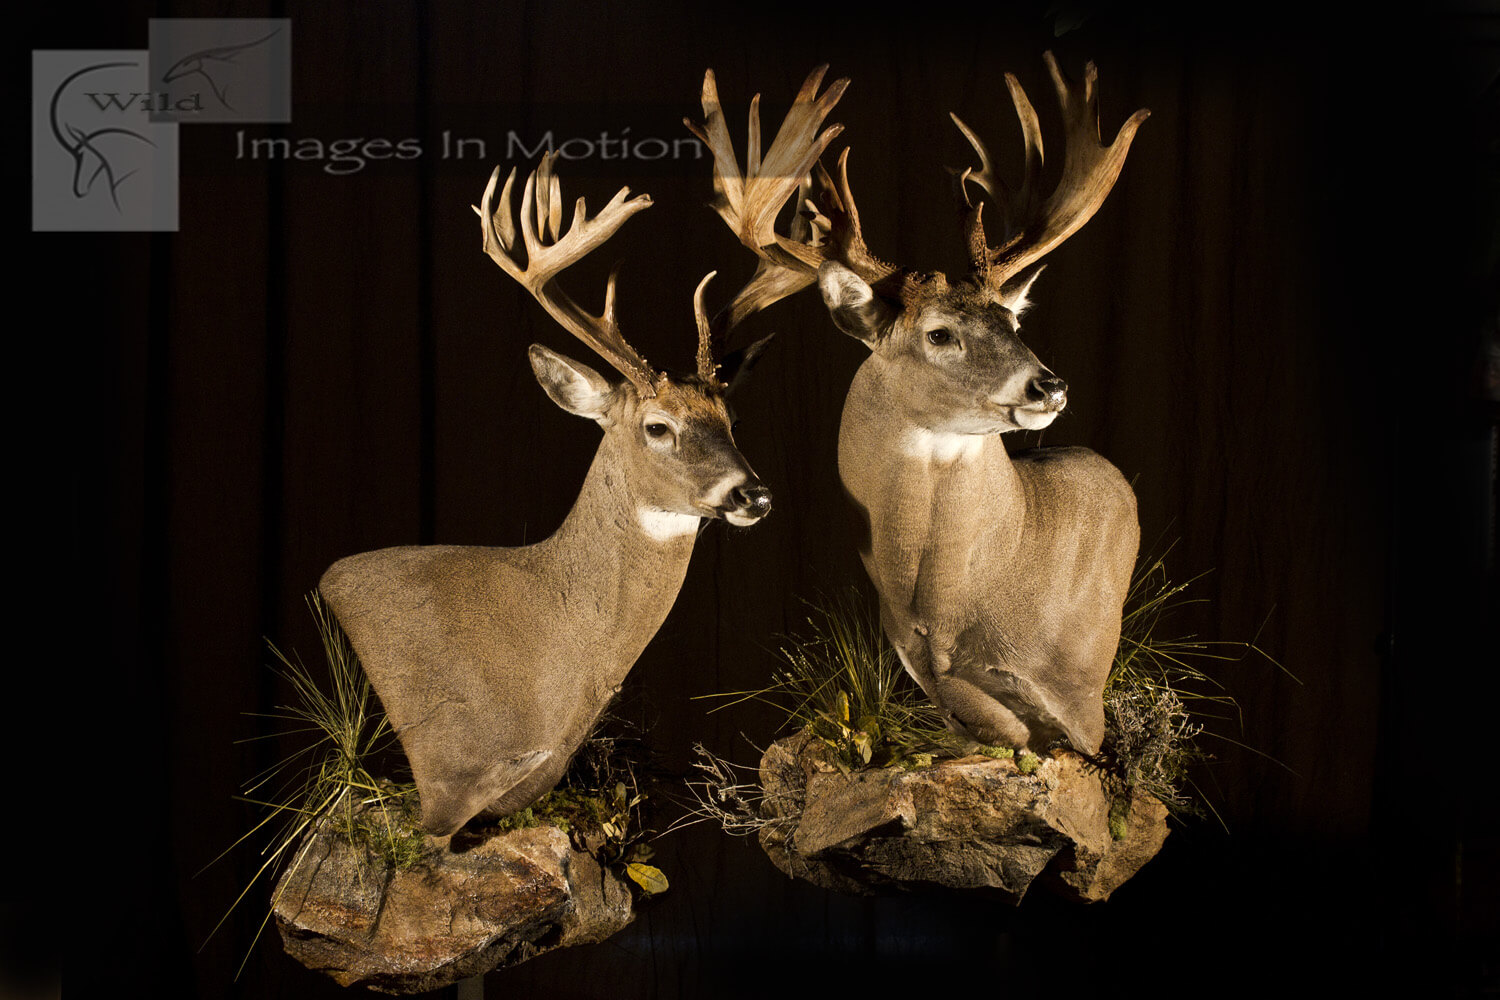 Pair of Non-typical Whitetail Deer